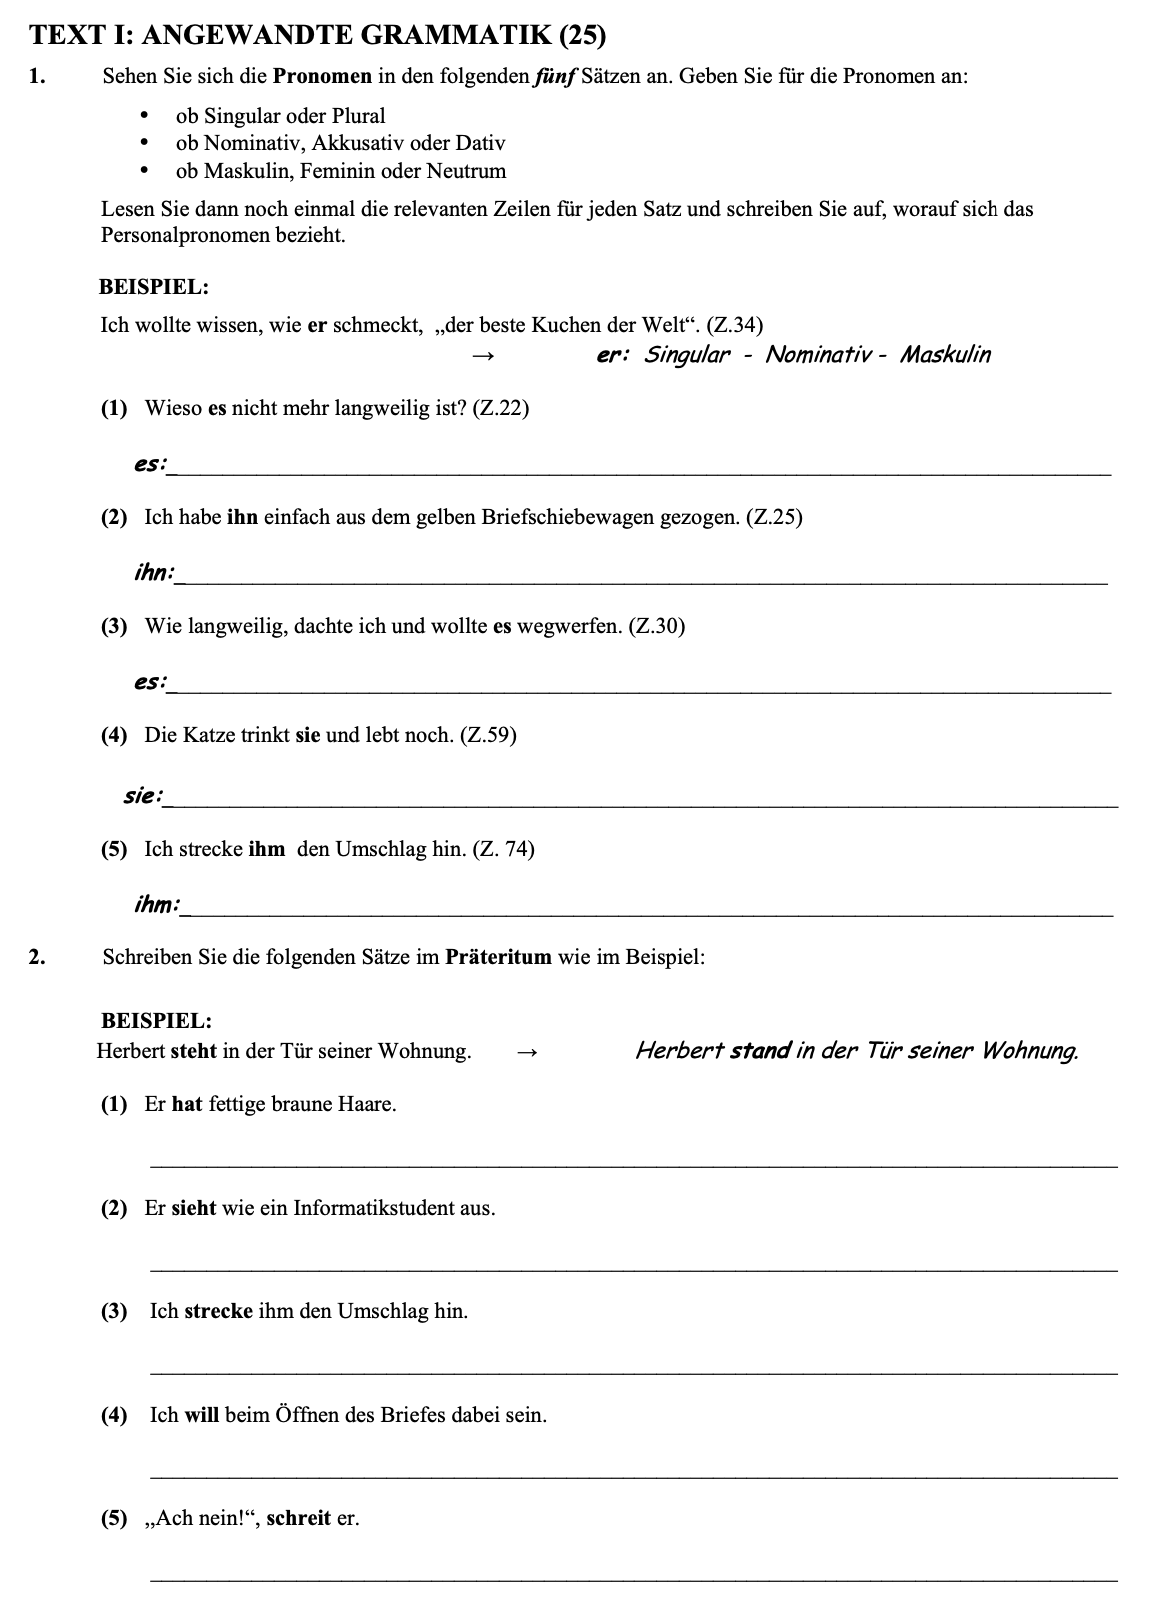 an image of the question 2005 Text I Angewandte Grammatik which is about the topic grammatik and the subject is Leaving Certificate german